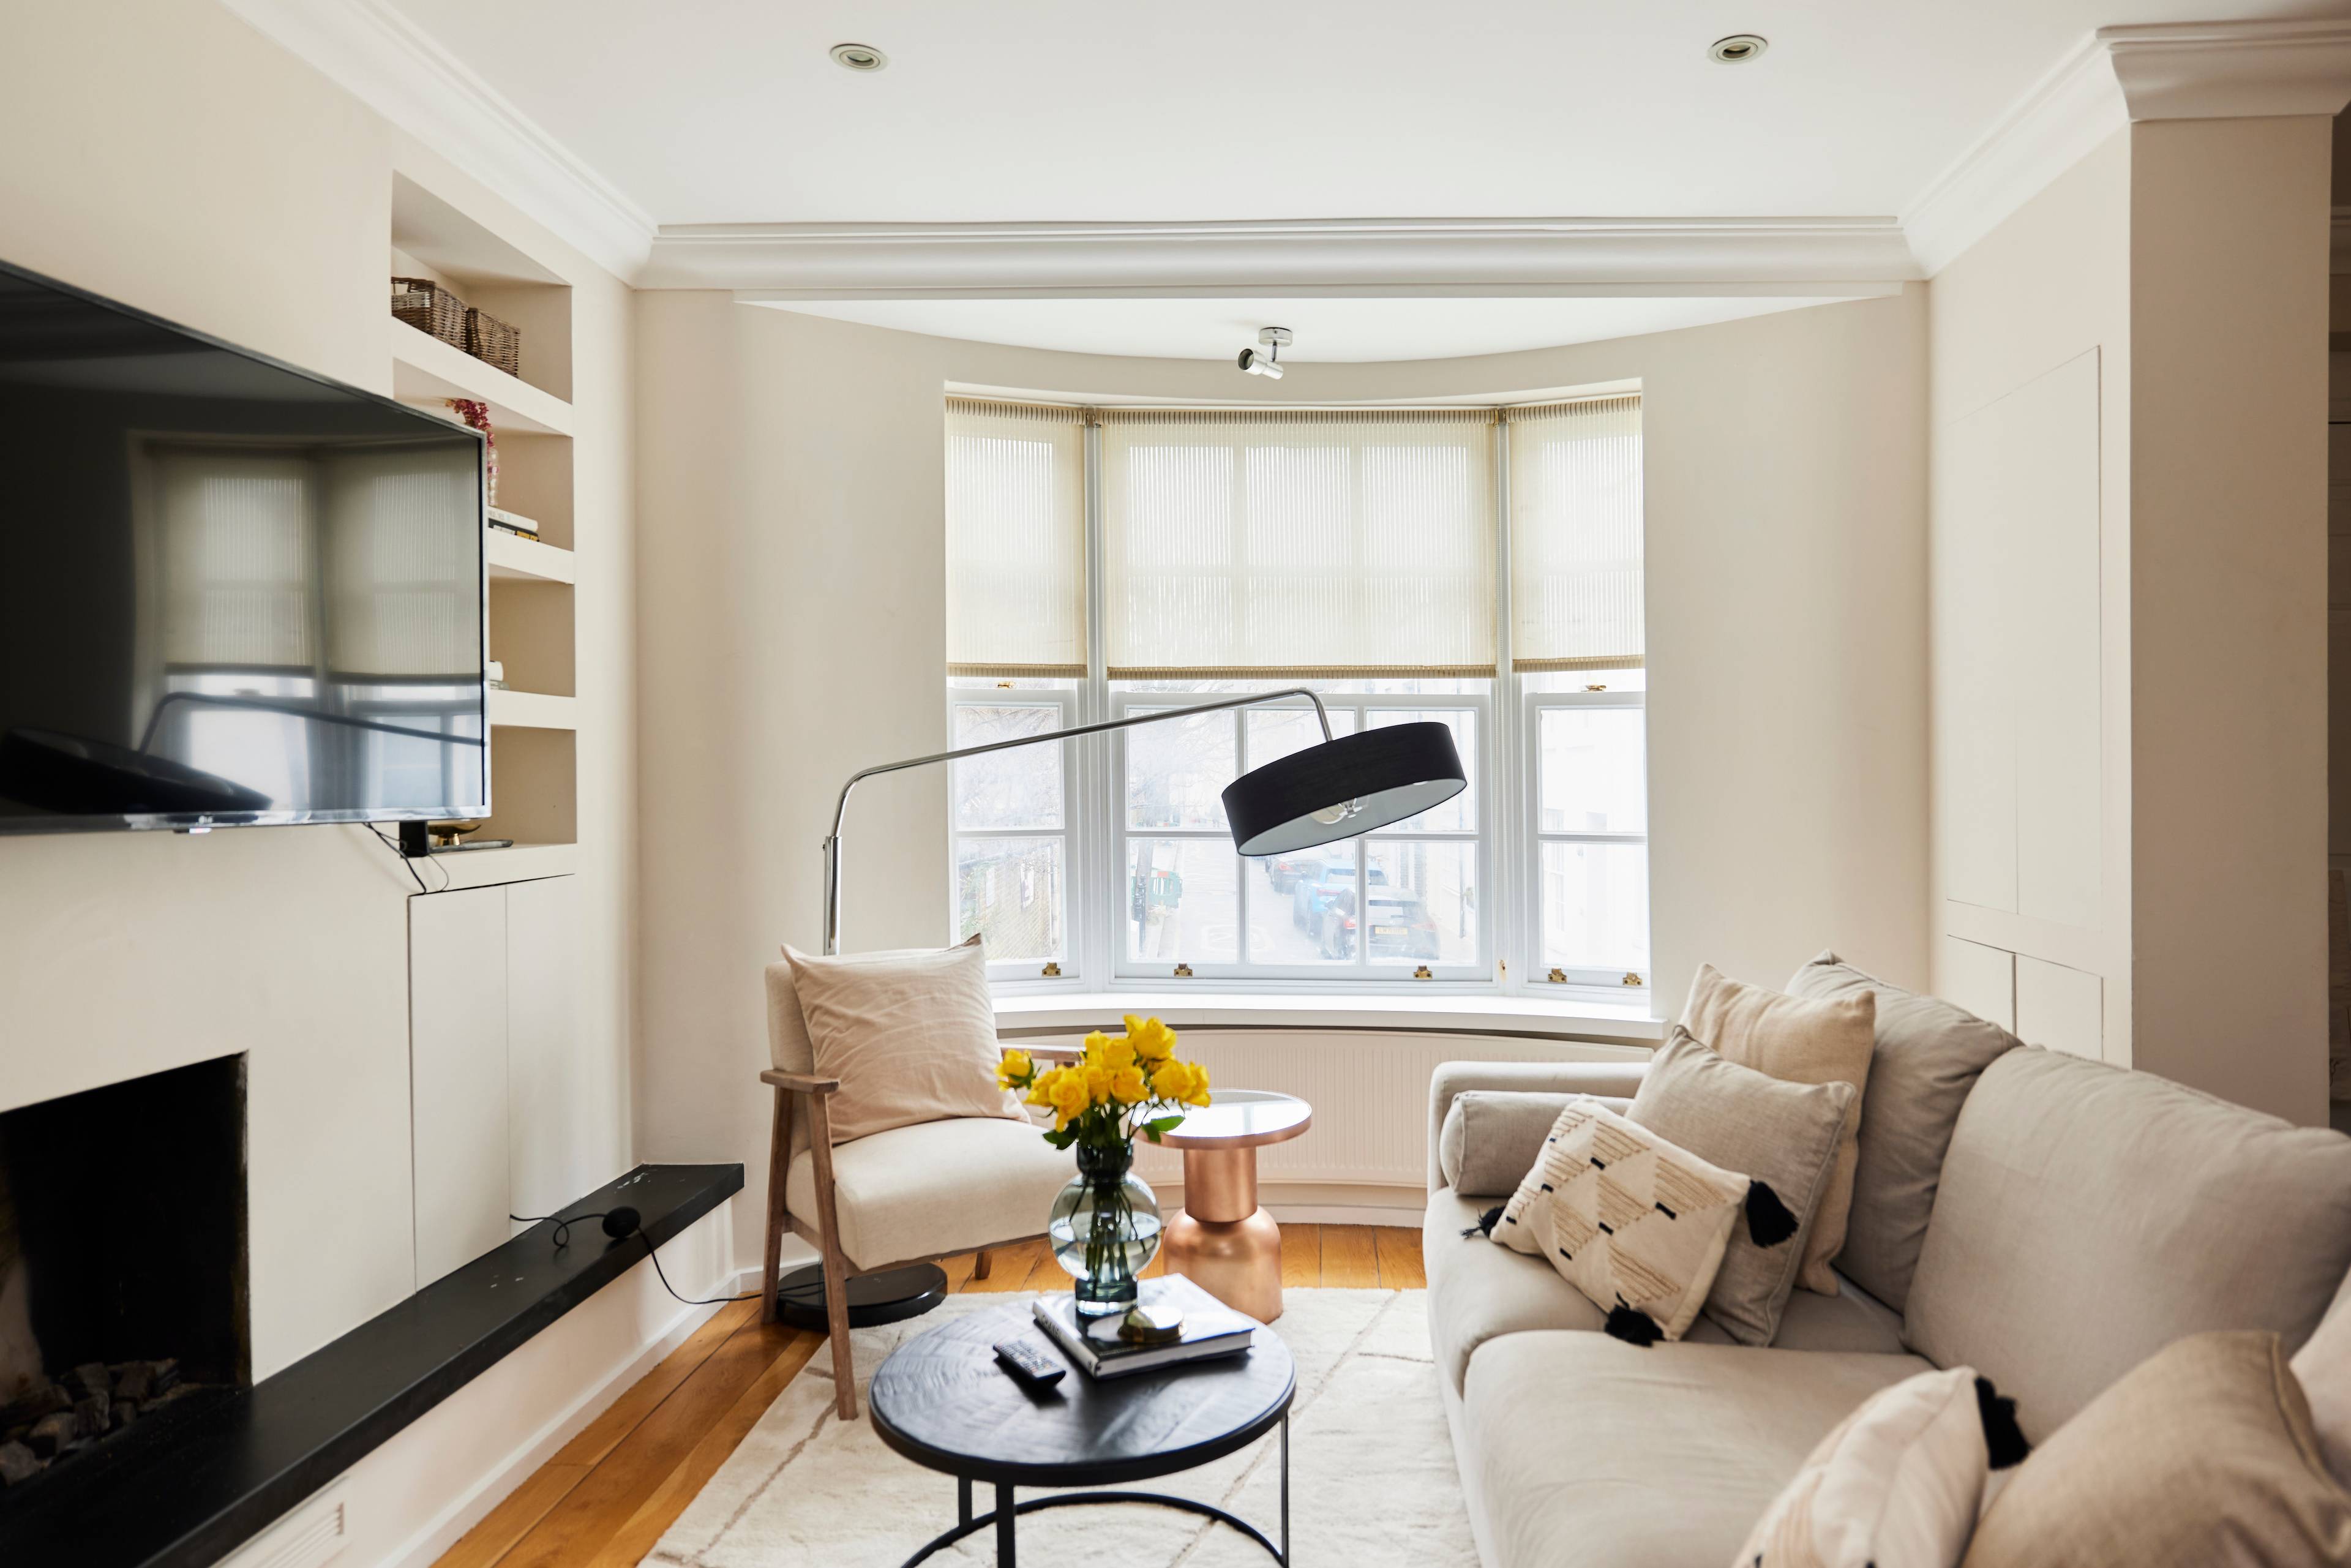 Exquisite Four-Bedroom House with Two Terraces in South Kensington - Prime Central London